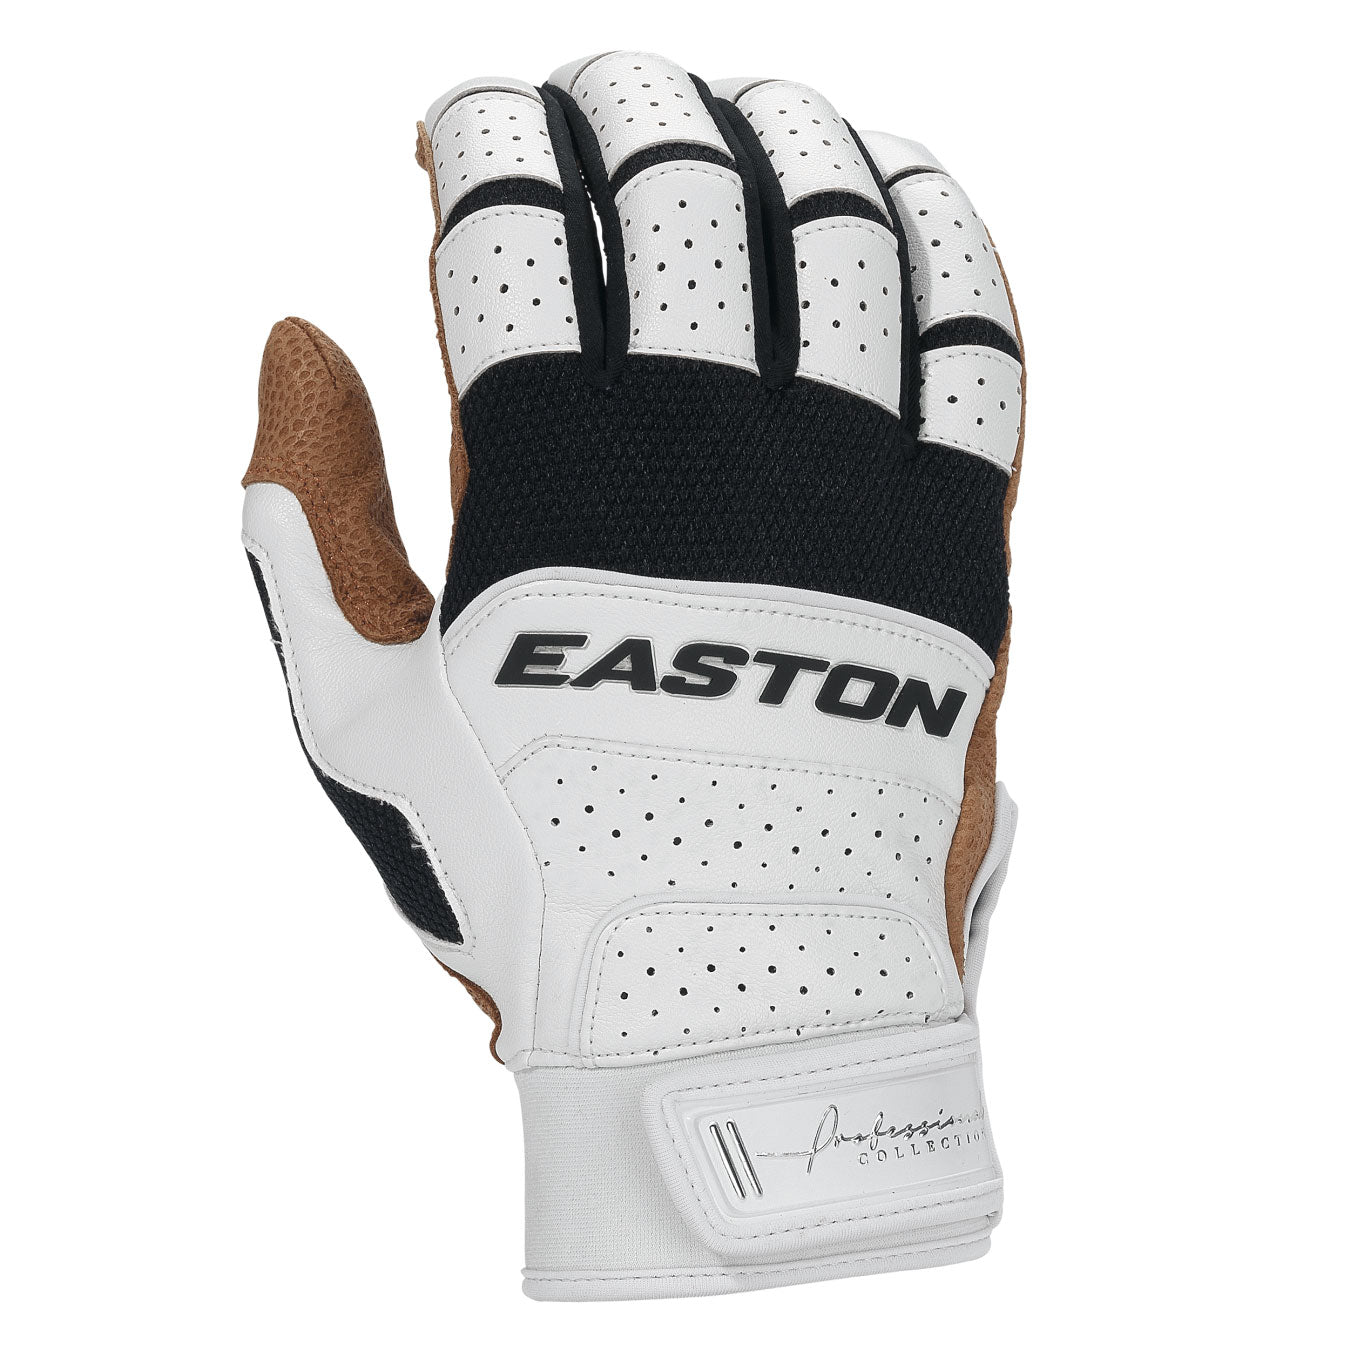 Easton Pro Collection Adult Batting Gloves